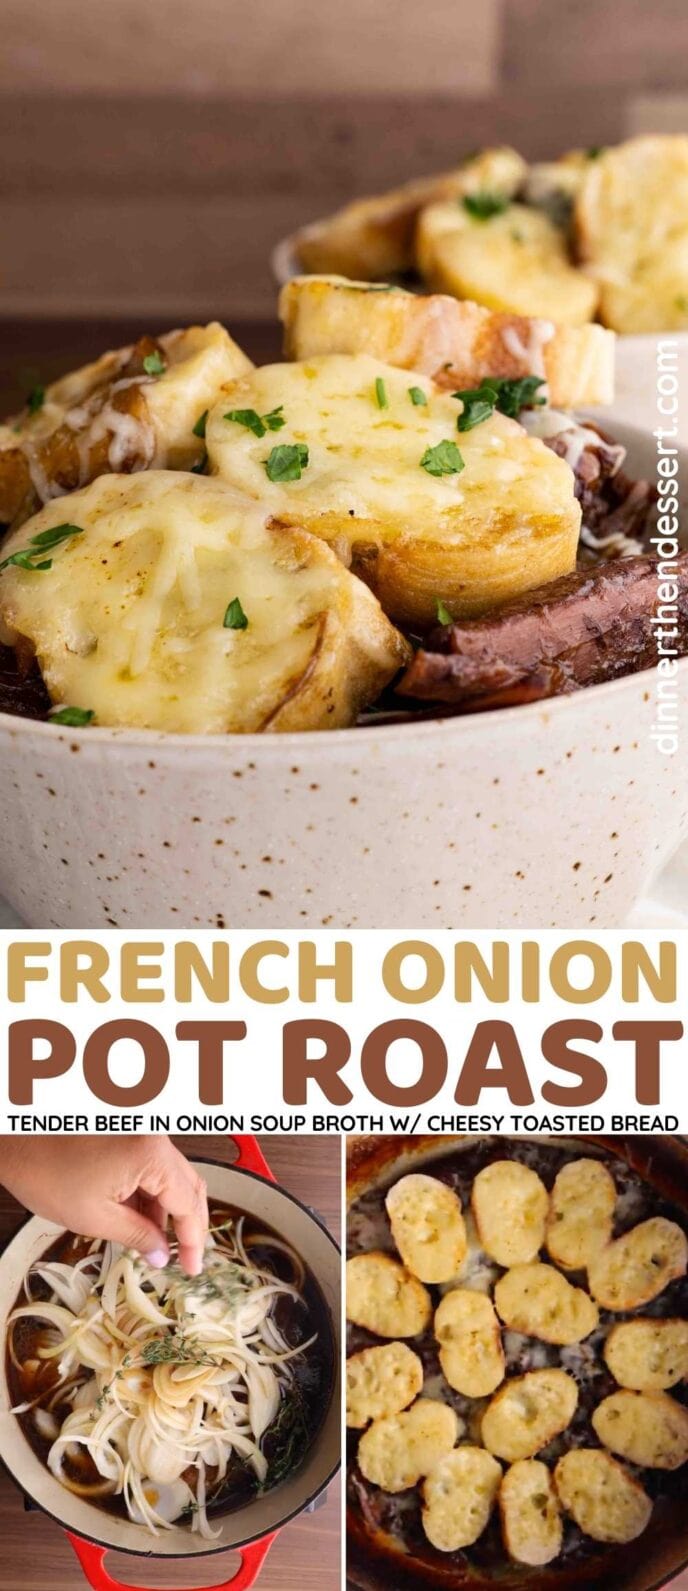 French Onion Pot Roast collage